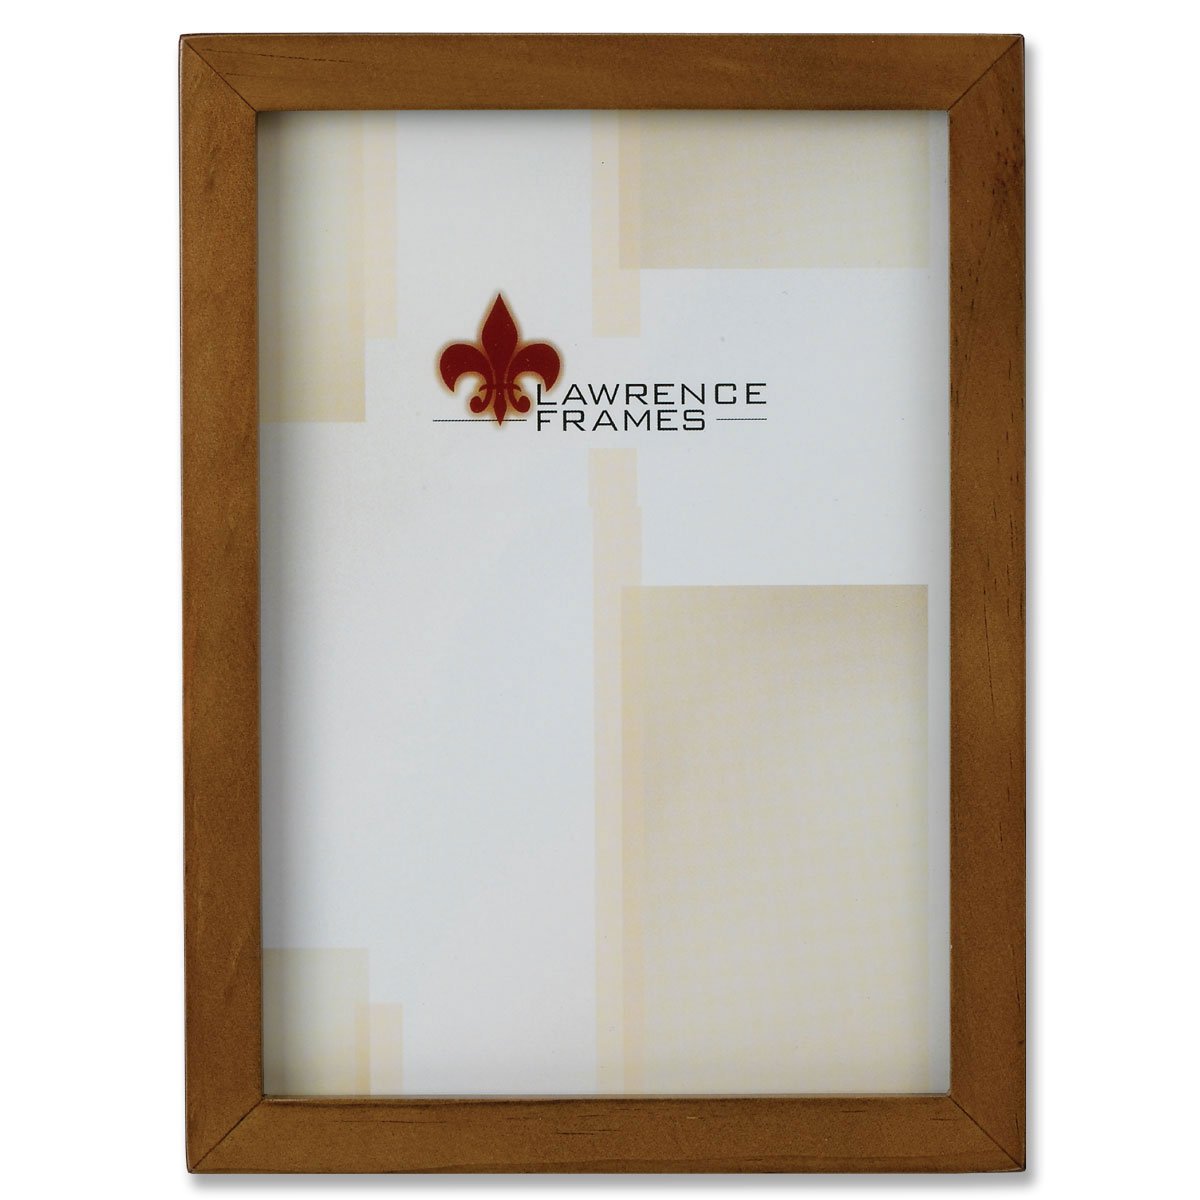 Lawrenceframes 766057 5 X 7 In. Nutmeg Wood Picture Frame